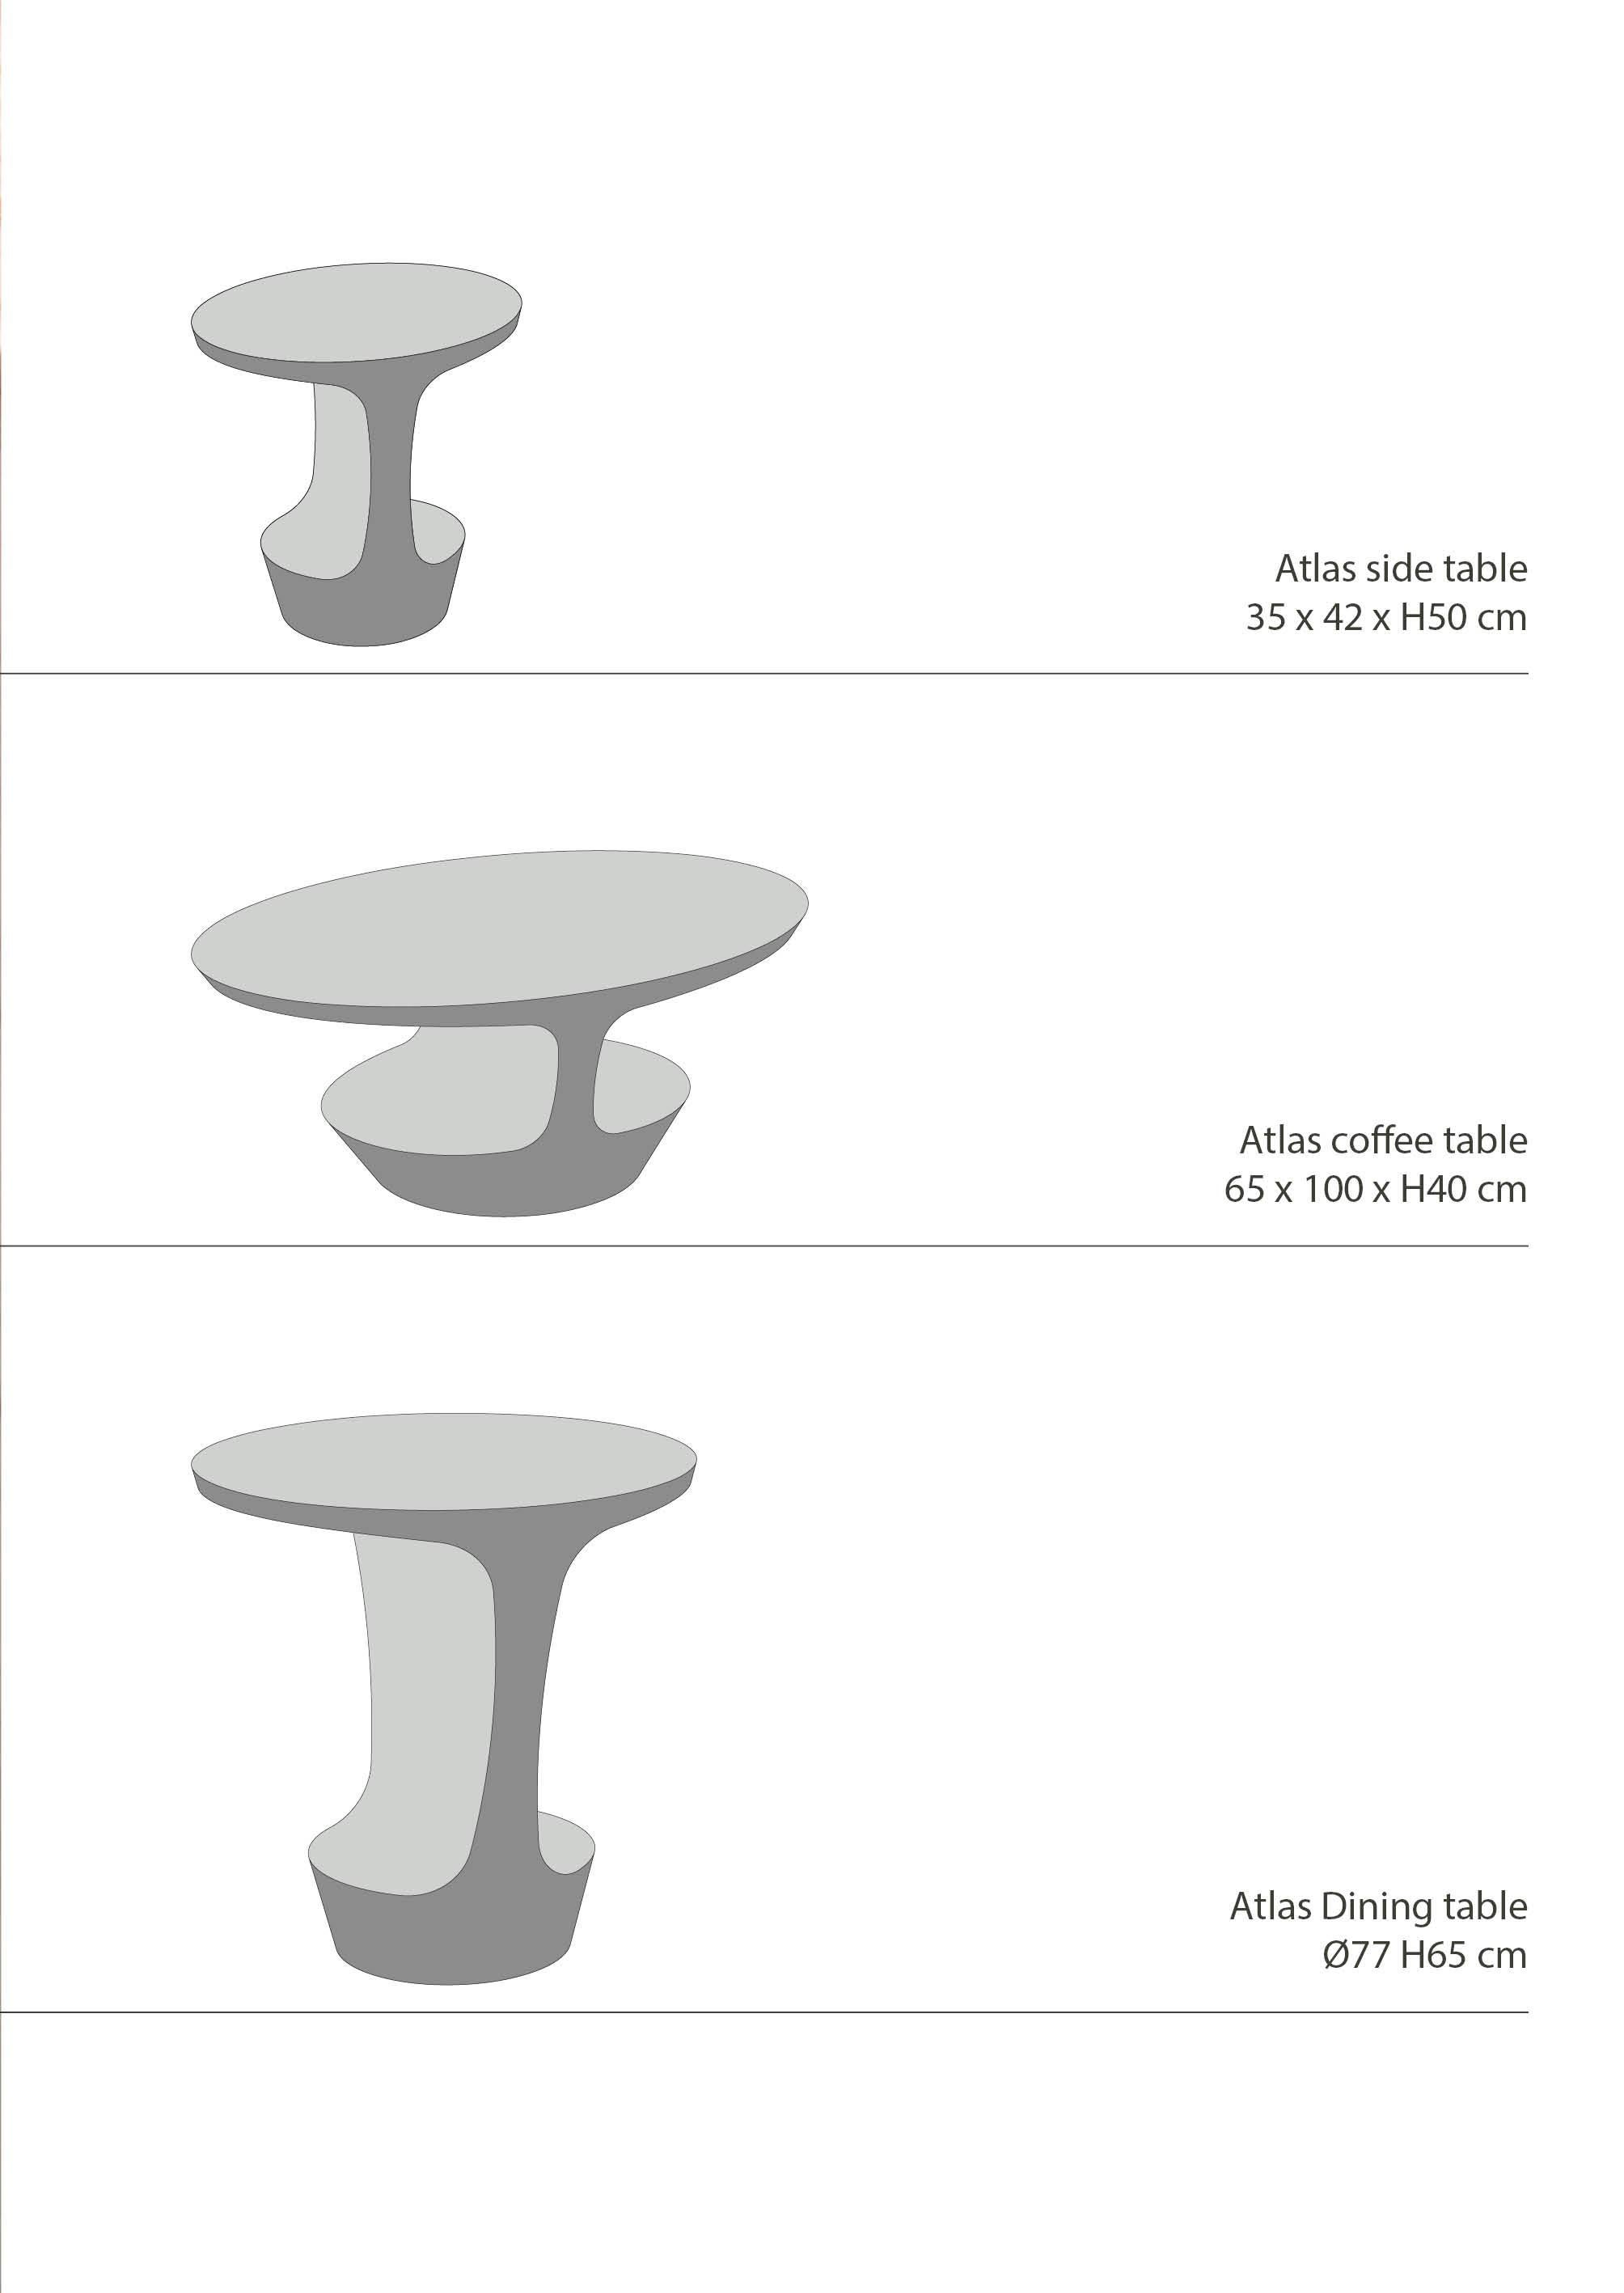 Side Table in Calacatta Viola Marble, Atlas table by Adolfo Abejon for Formar For Sale 5